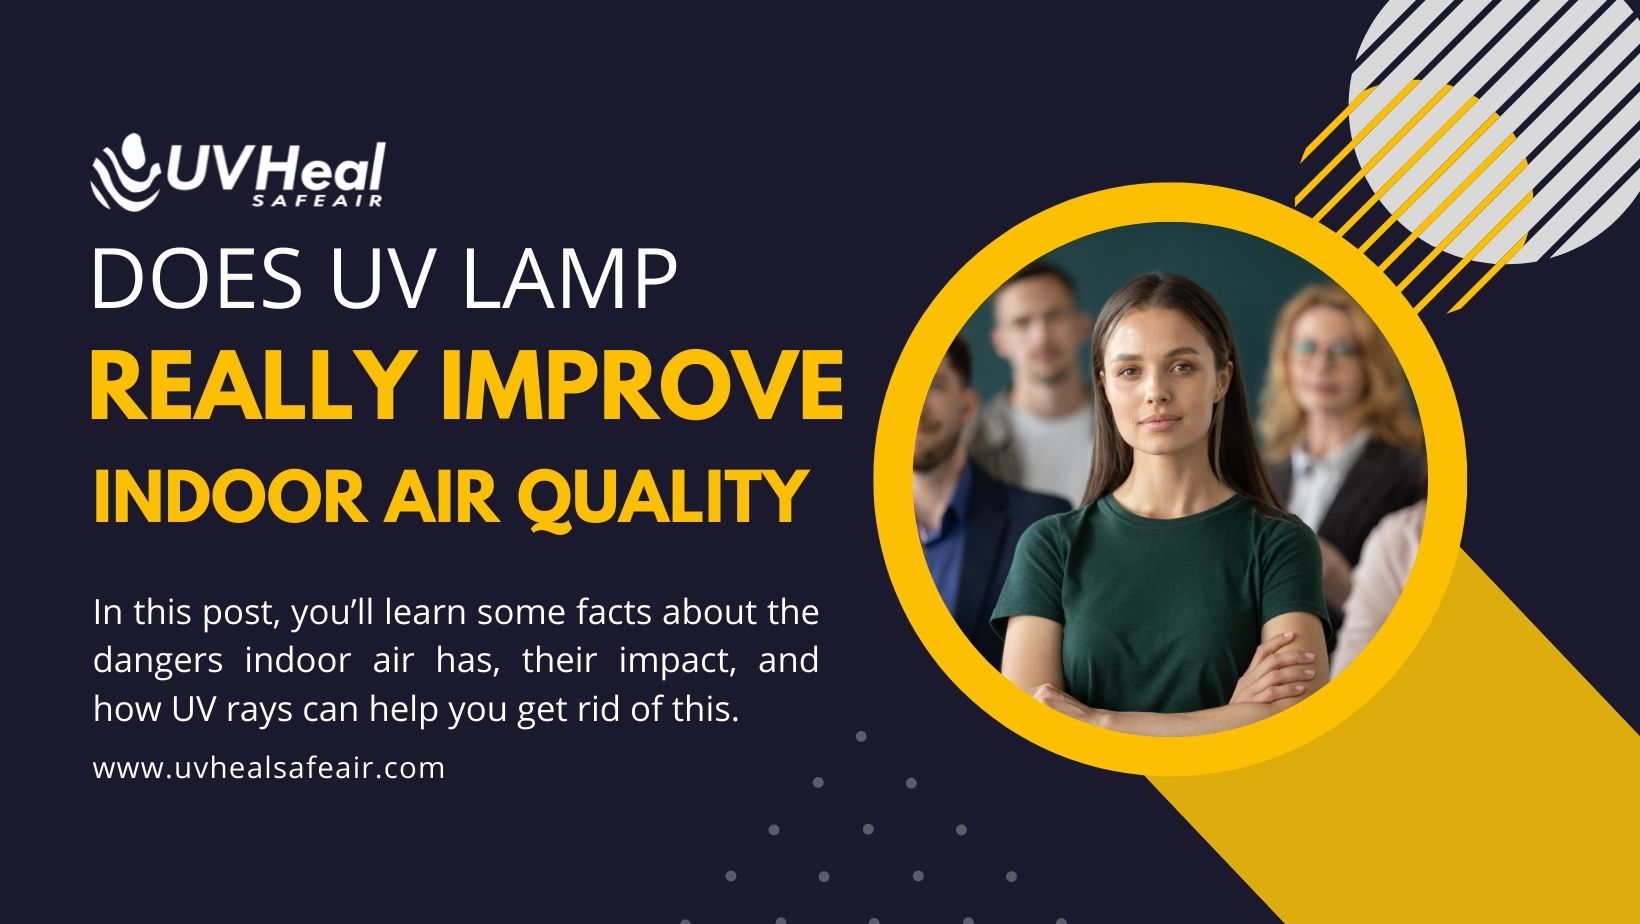 Does UV Lamp Really Improve Indoor Air Quality with UVGI System in HVAC Duct Does UV Lamp Really Improve Indoor Air Quality